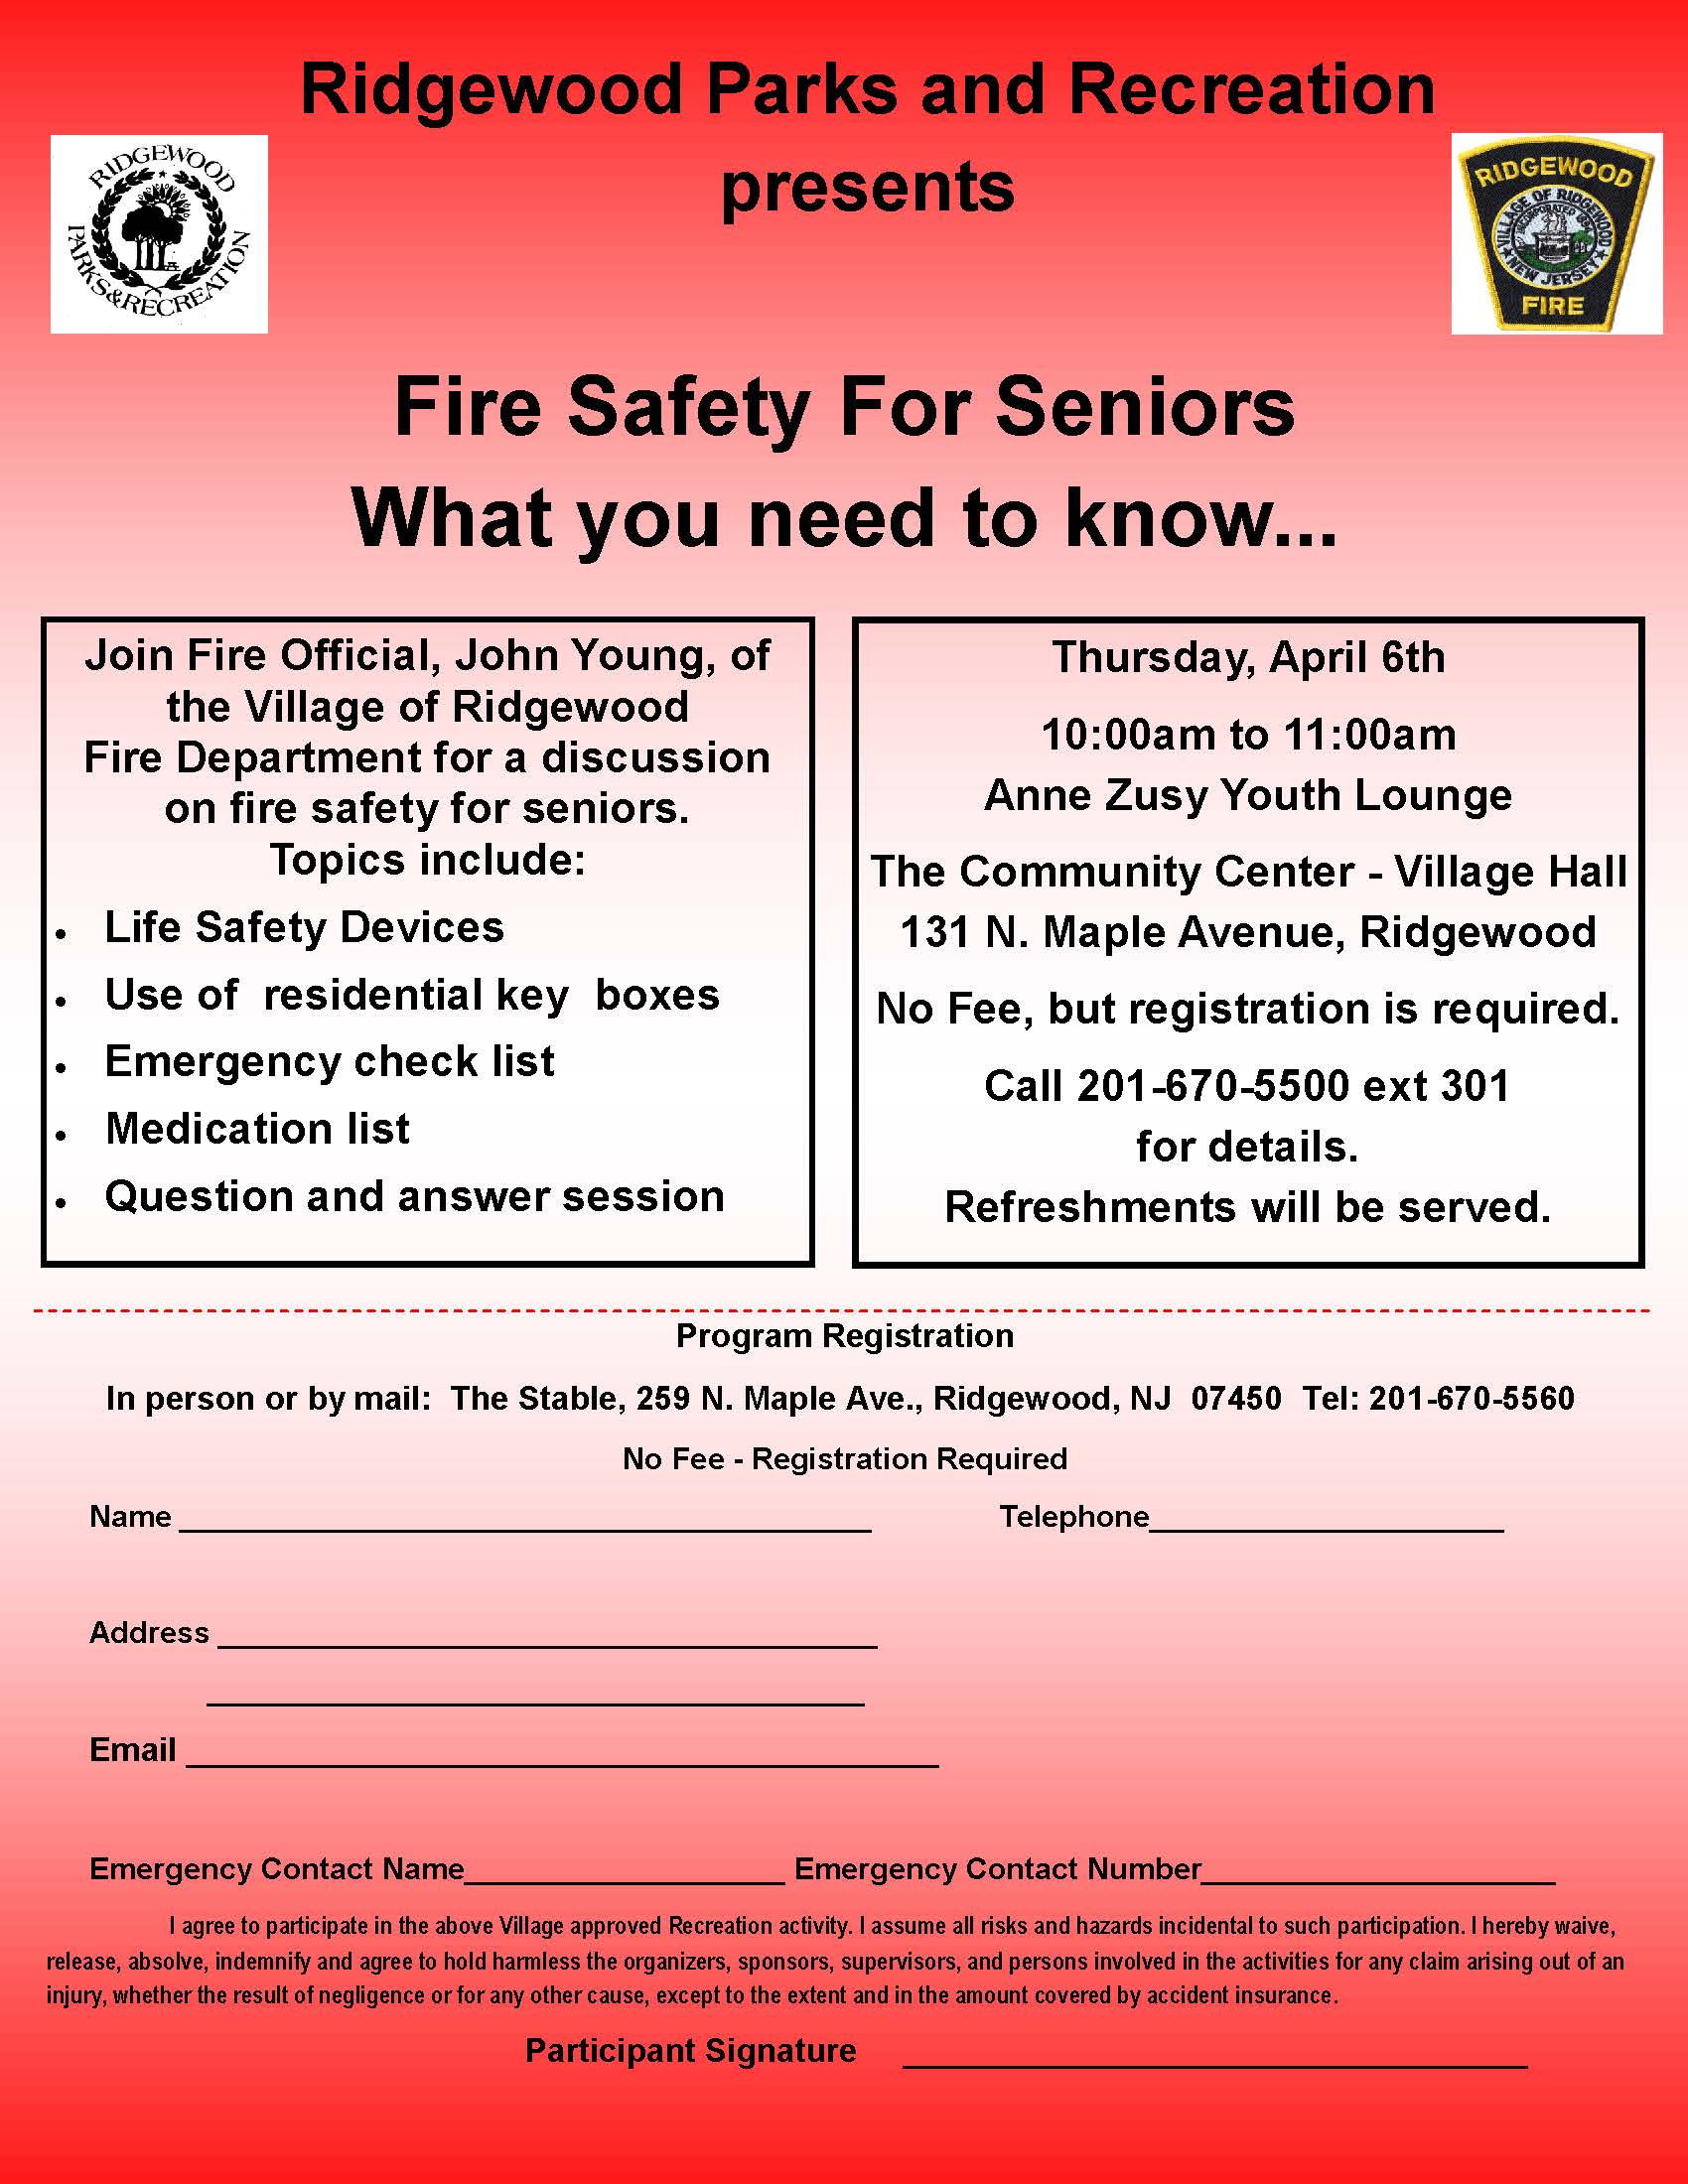 Fire Safety For Seniors